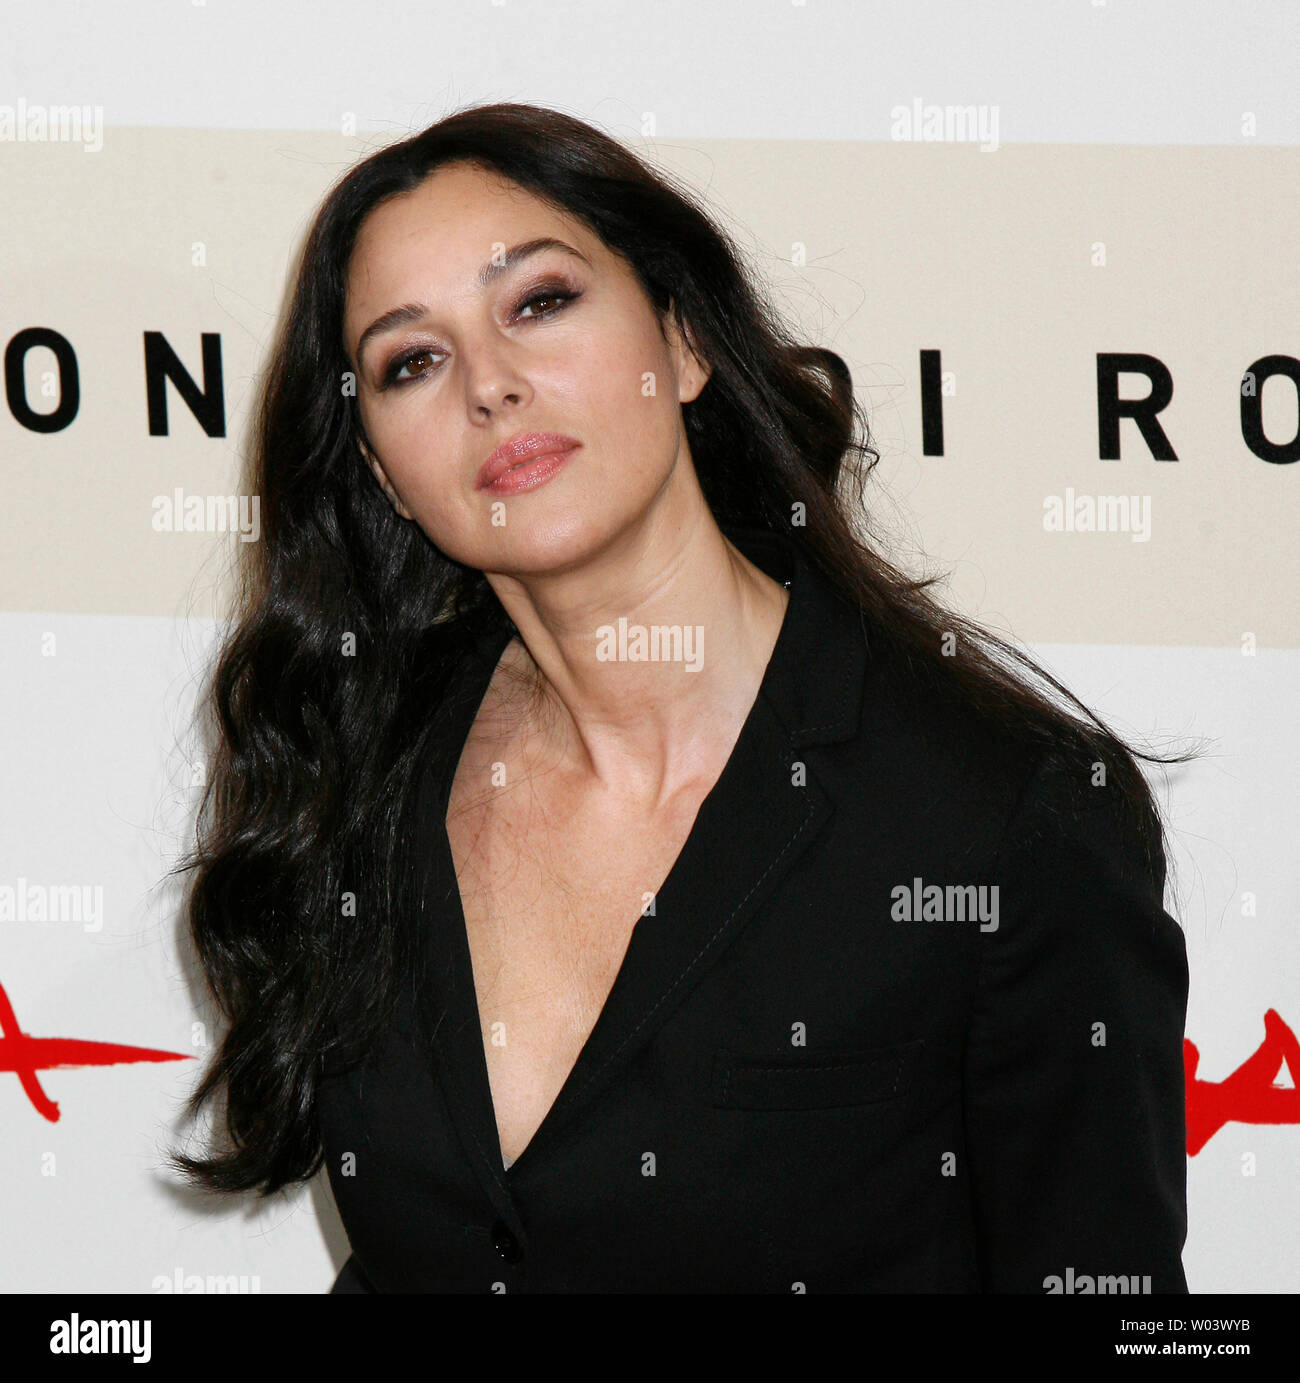 Actress Monica Bellucci arrives at the Rome Film Festival in Rome on October 18, 2007.  Bellucci is in Rome with her film 'Le Deuxieme Souffle' ('The Second Wind').   (UPI Photo/David Silpa) Stock Photo